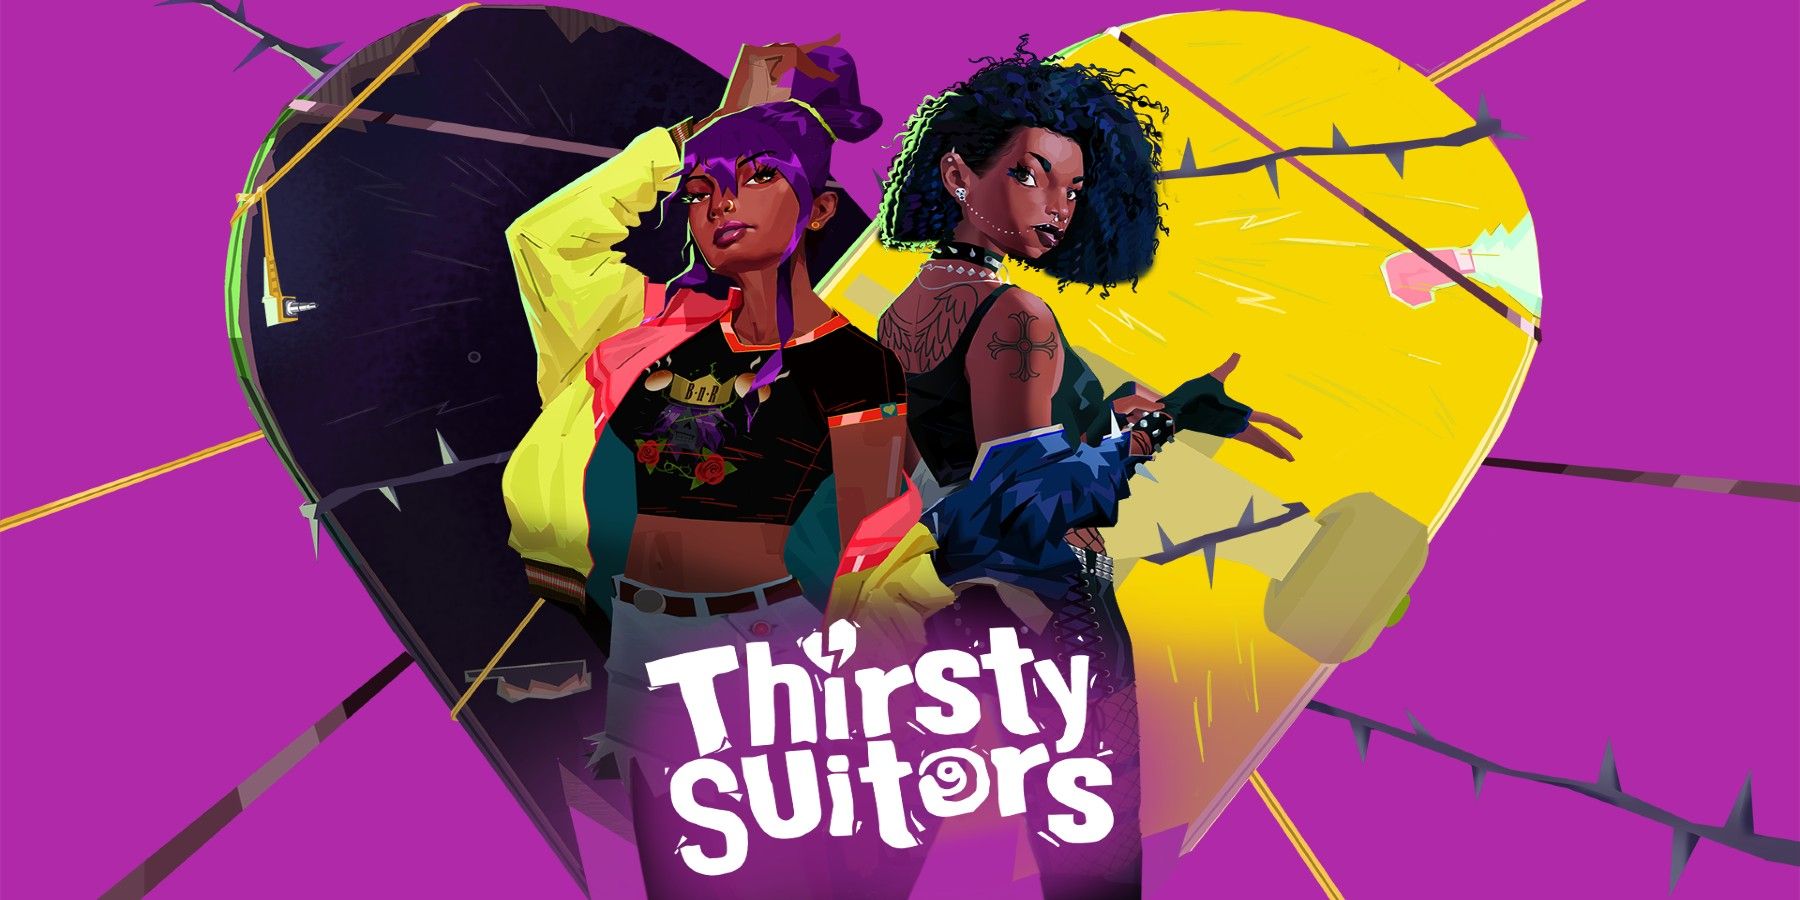 Thirsty Suitors game title art.